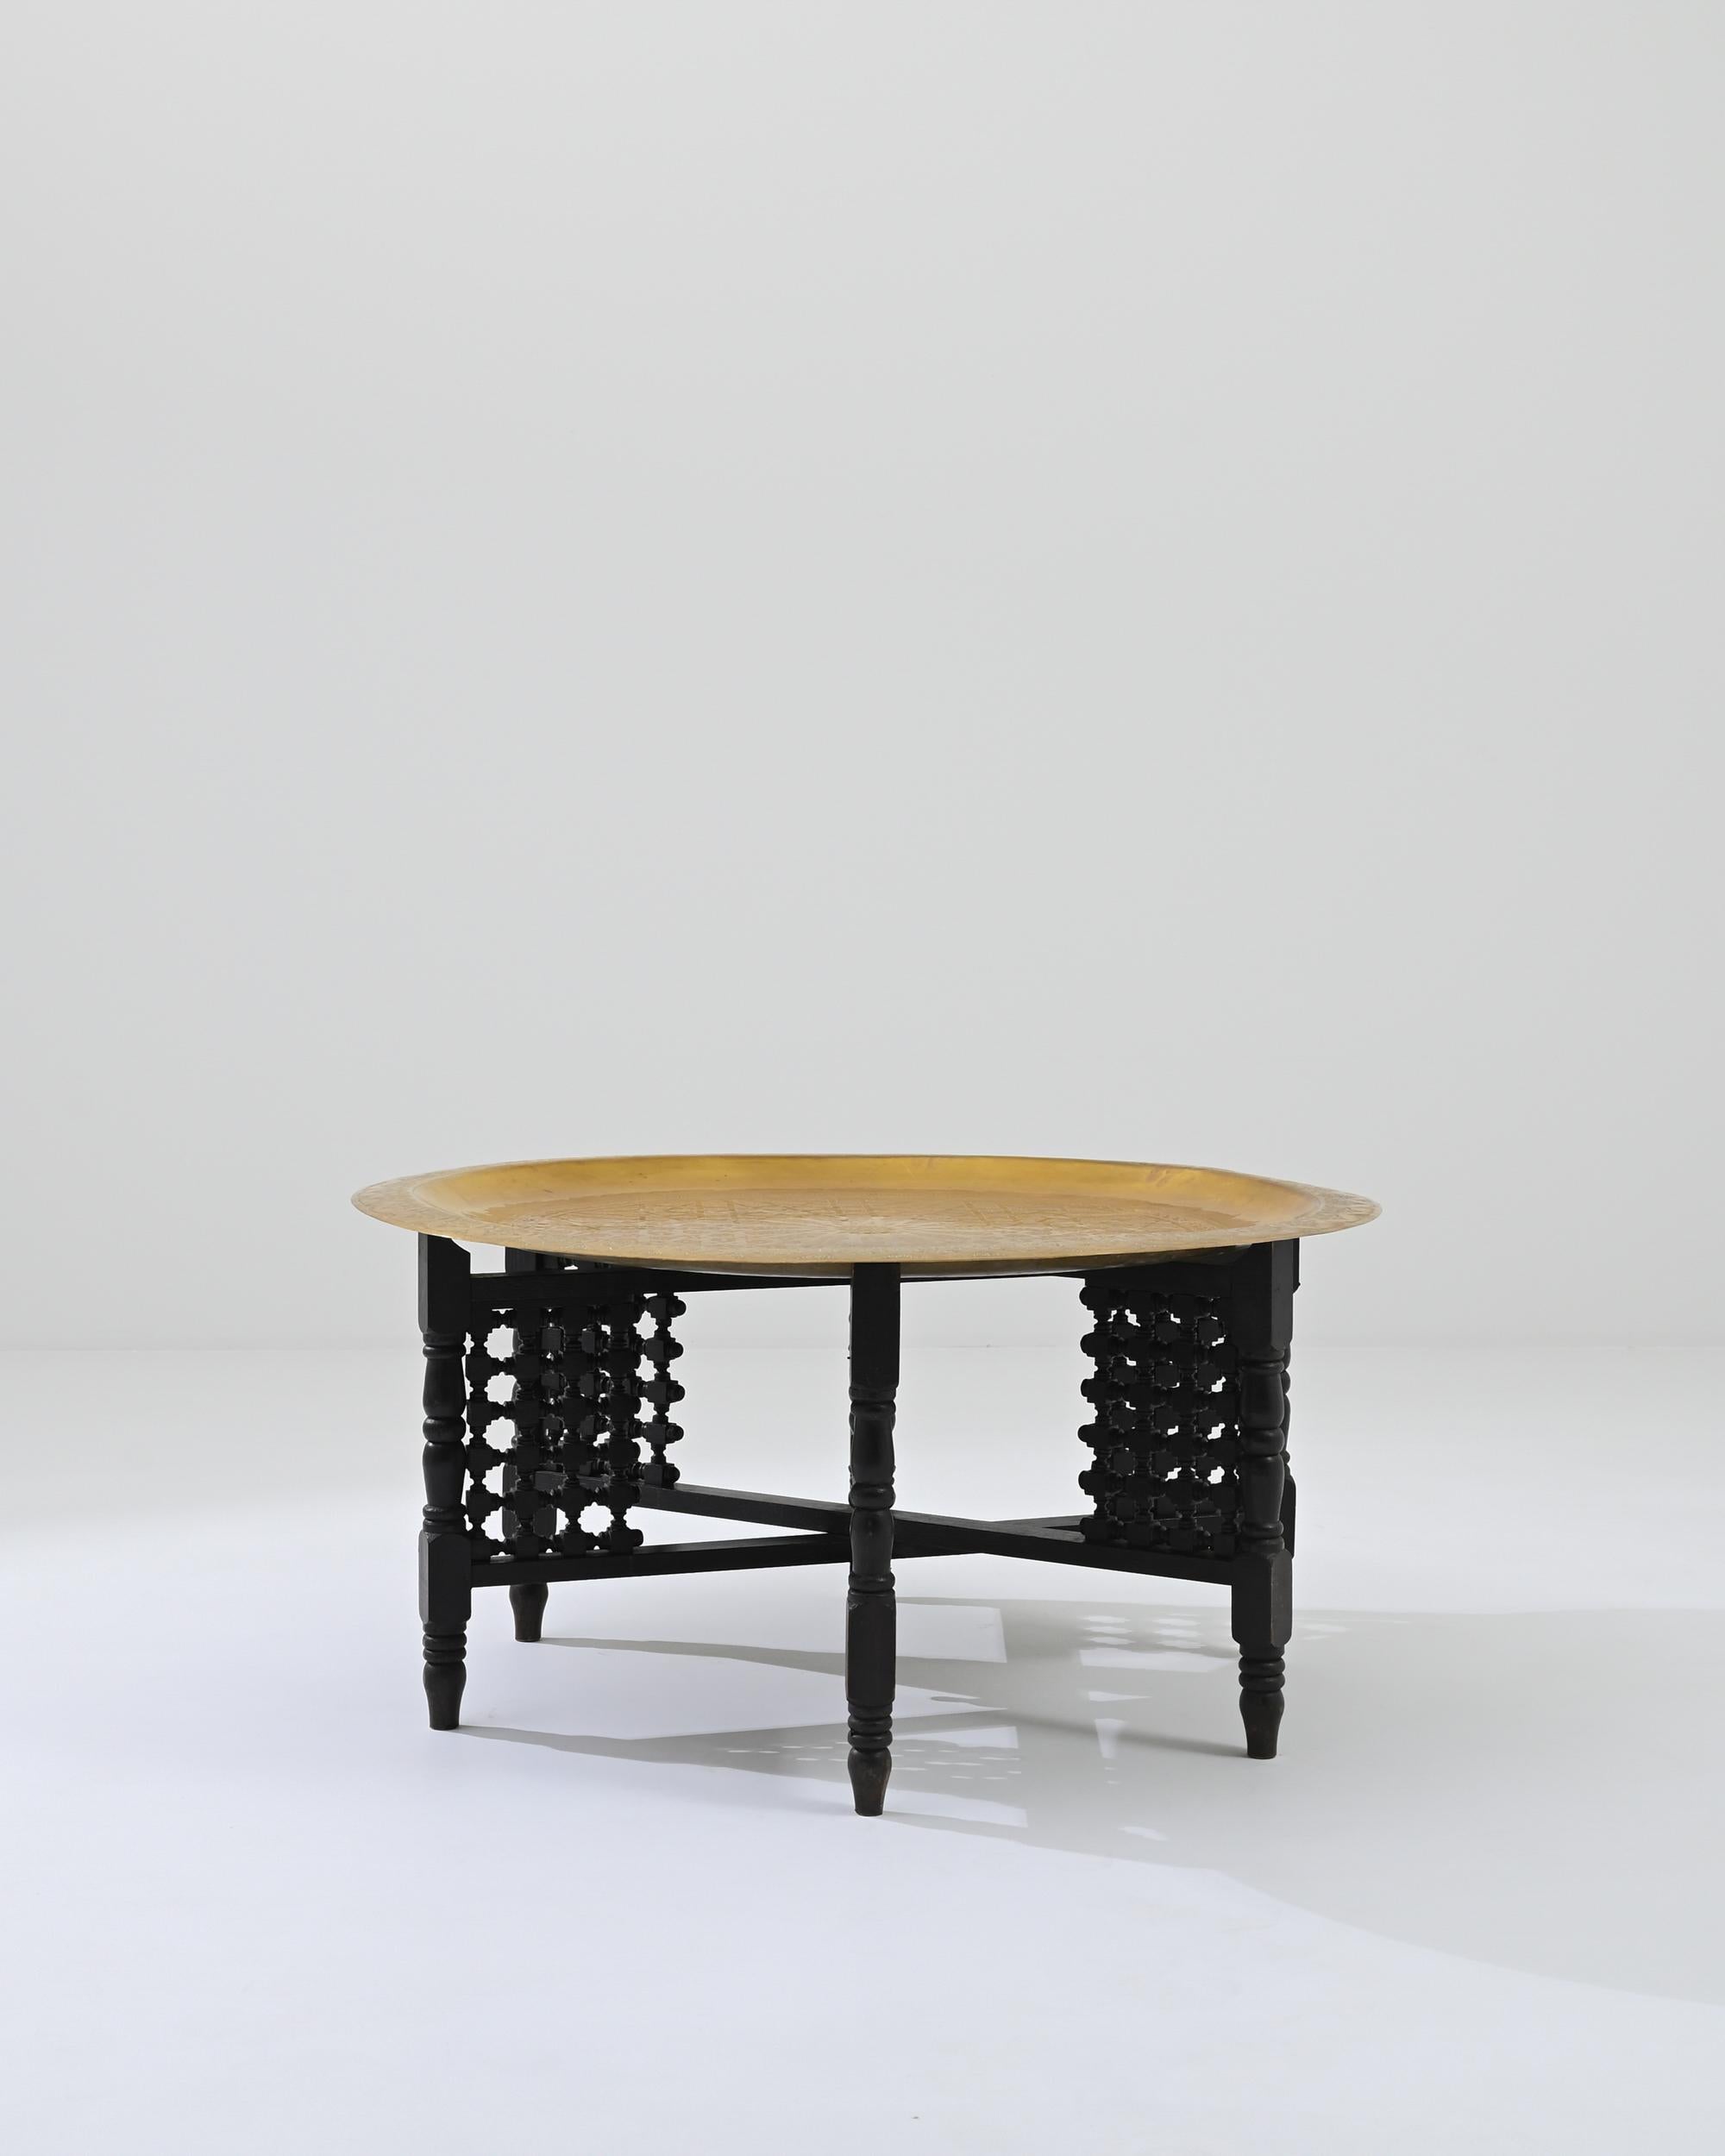 A bray tray tea table on a folding base sourced in North Africa. This spectacular coffee table is a picture of hand-crafted beauty, featuring lathed legs, chiseled patterns, and fastidiously inscribed patterning into its metal top. The combination